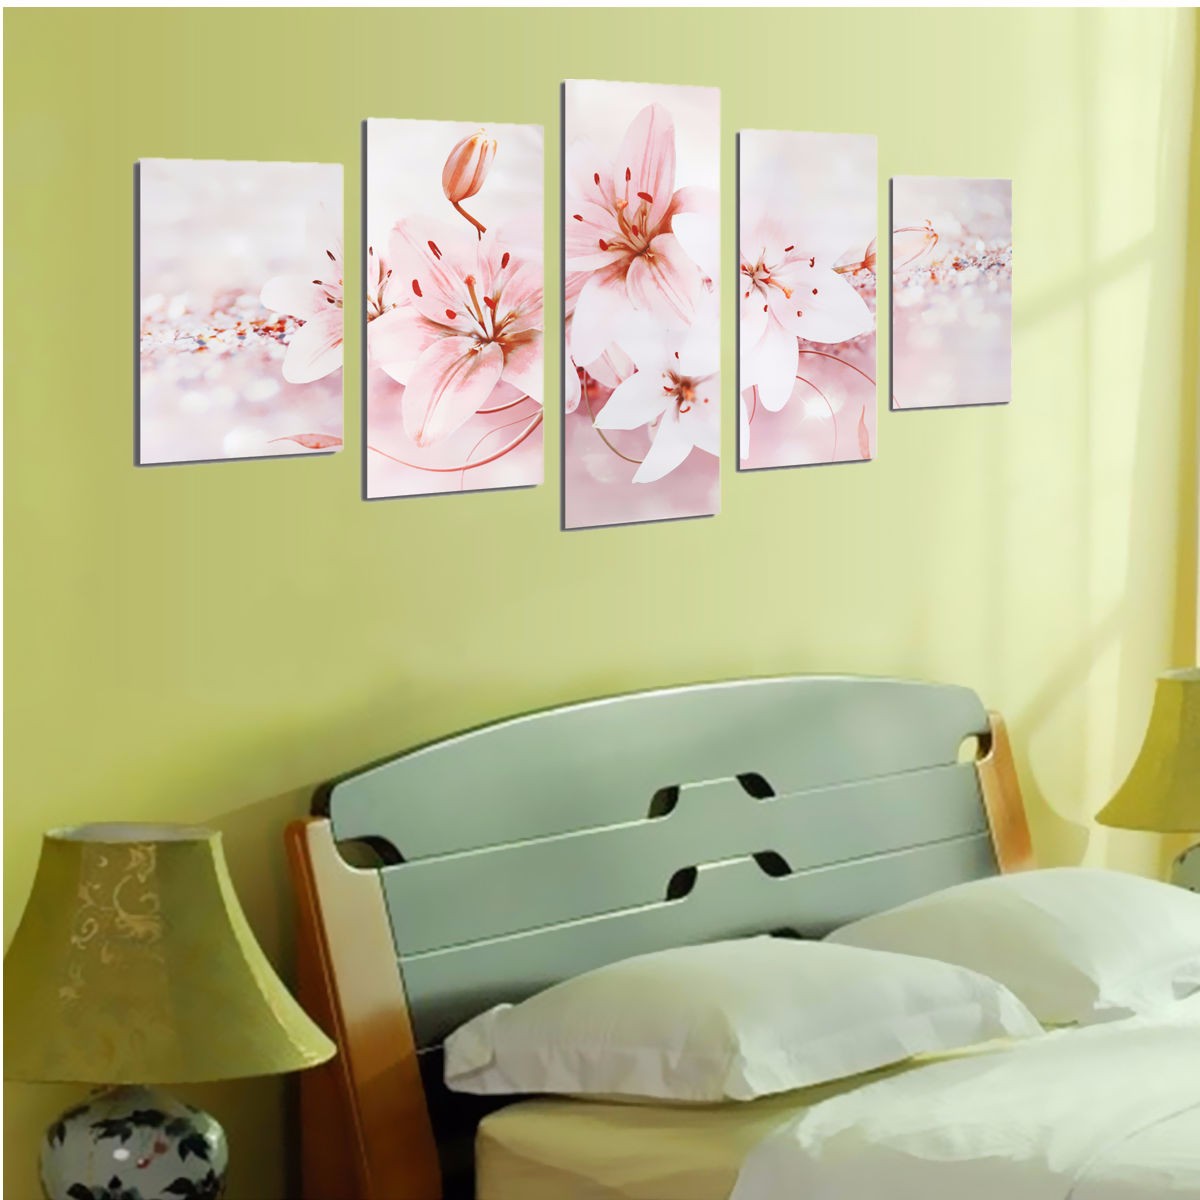 5PCS-Frameless-Canvas-Paintings-Lilies-Art-Paint-for-Home-Wall-Decoration-1080757-8